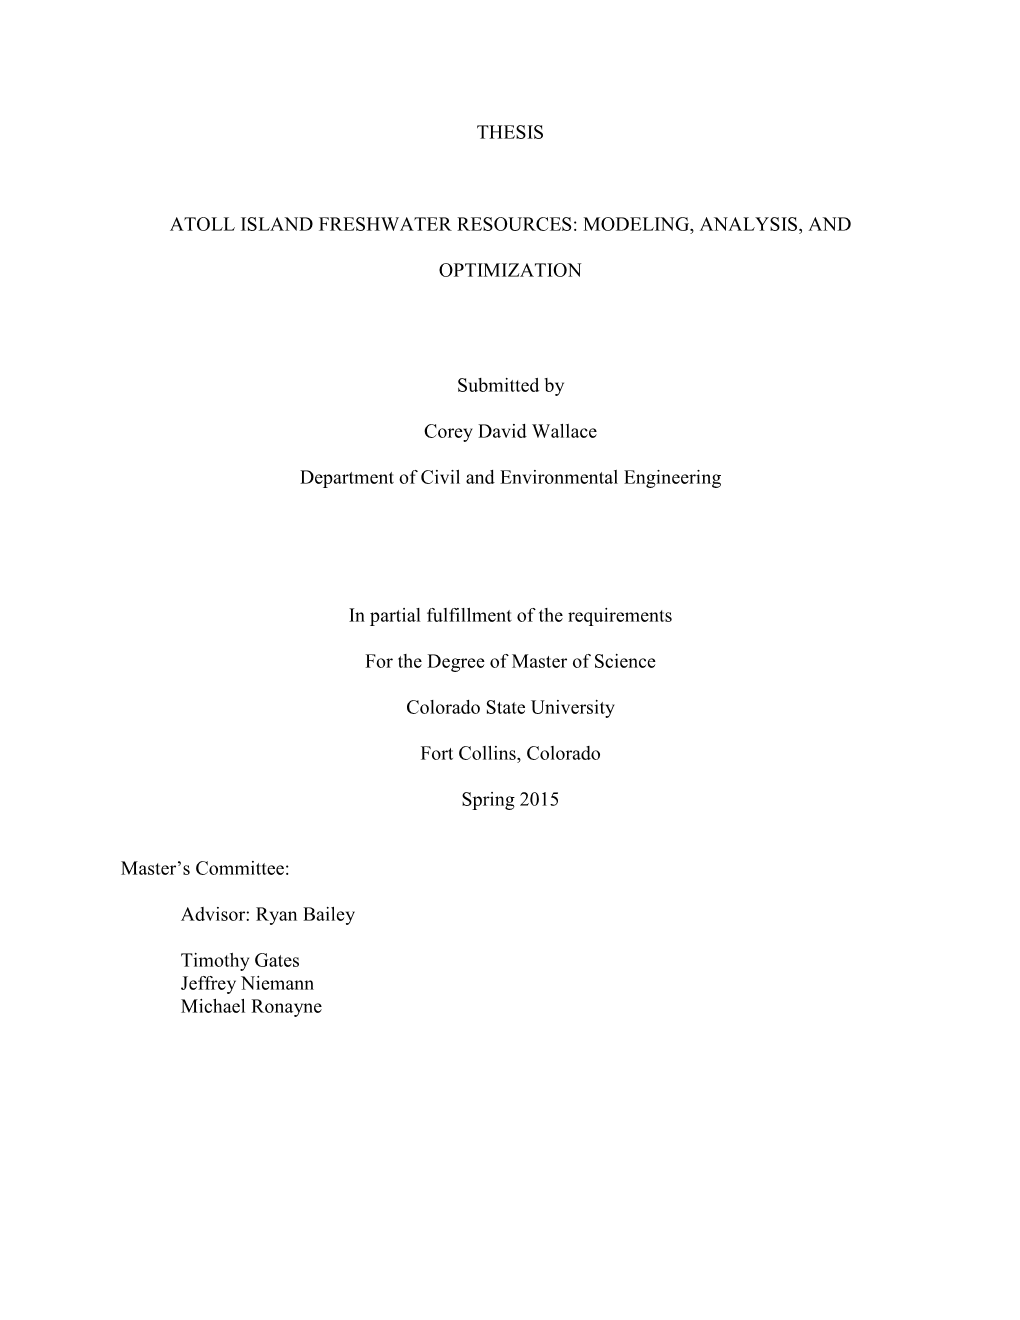 Thesis Atoll Island Freshwater Resources